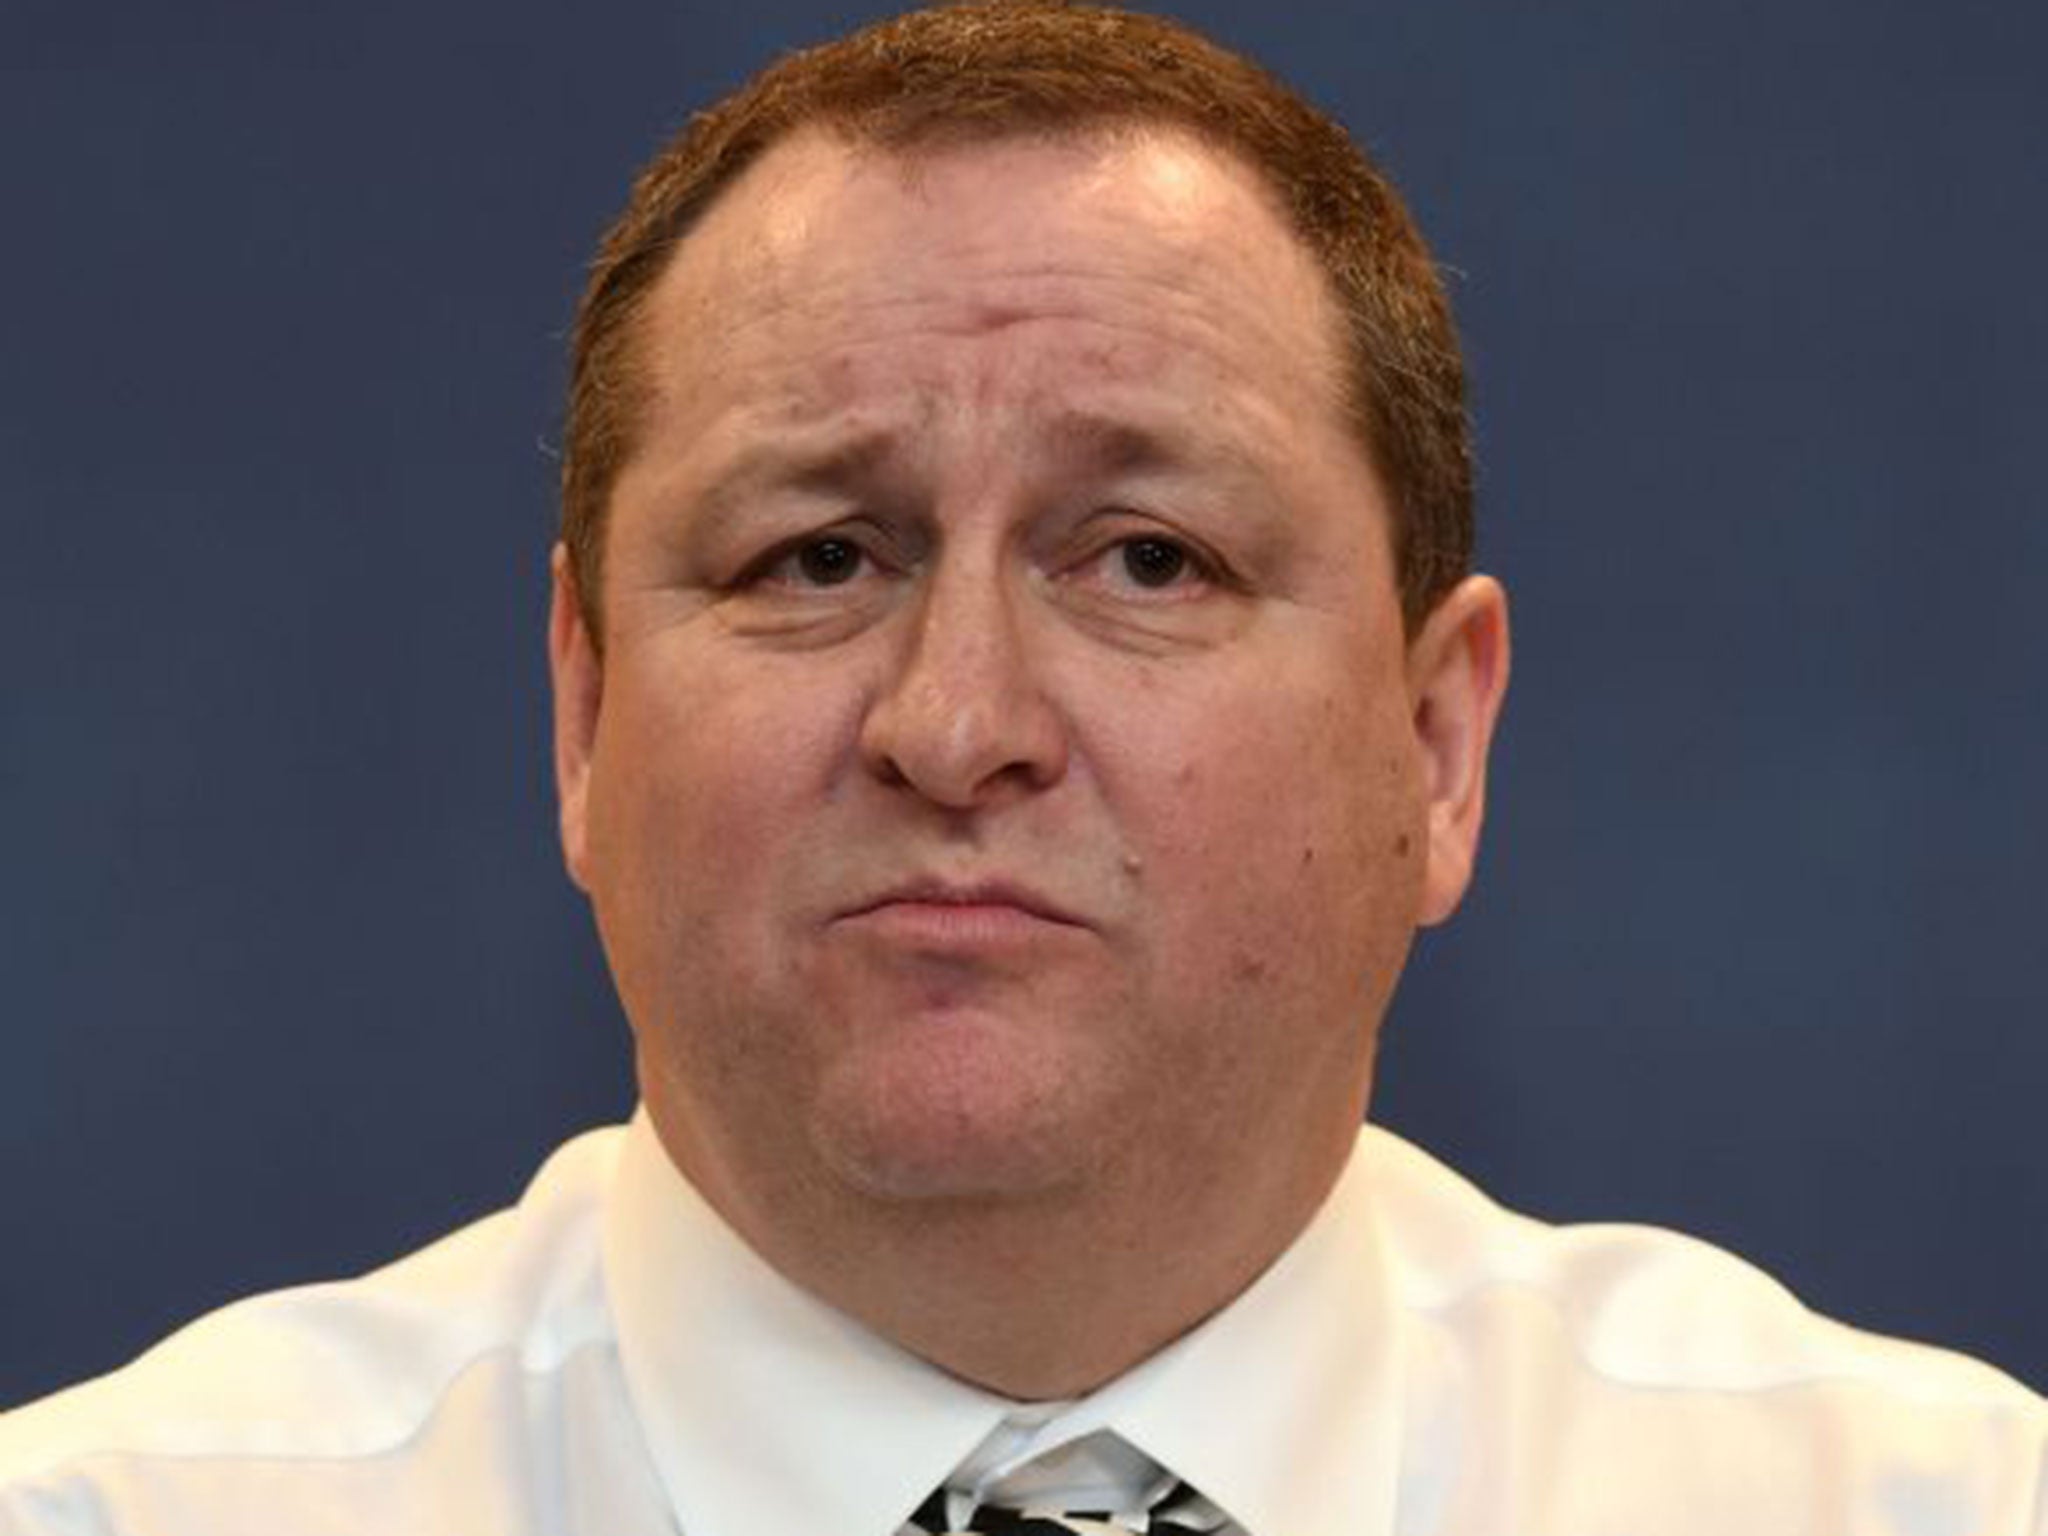 Mike Ashley, Sports Direct's founder has said he was unaware that staff were being paid less than minimum wage